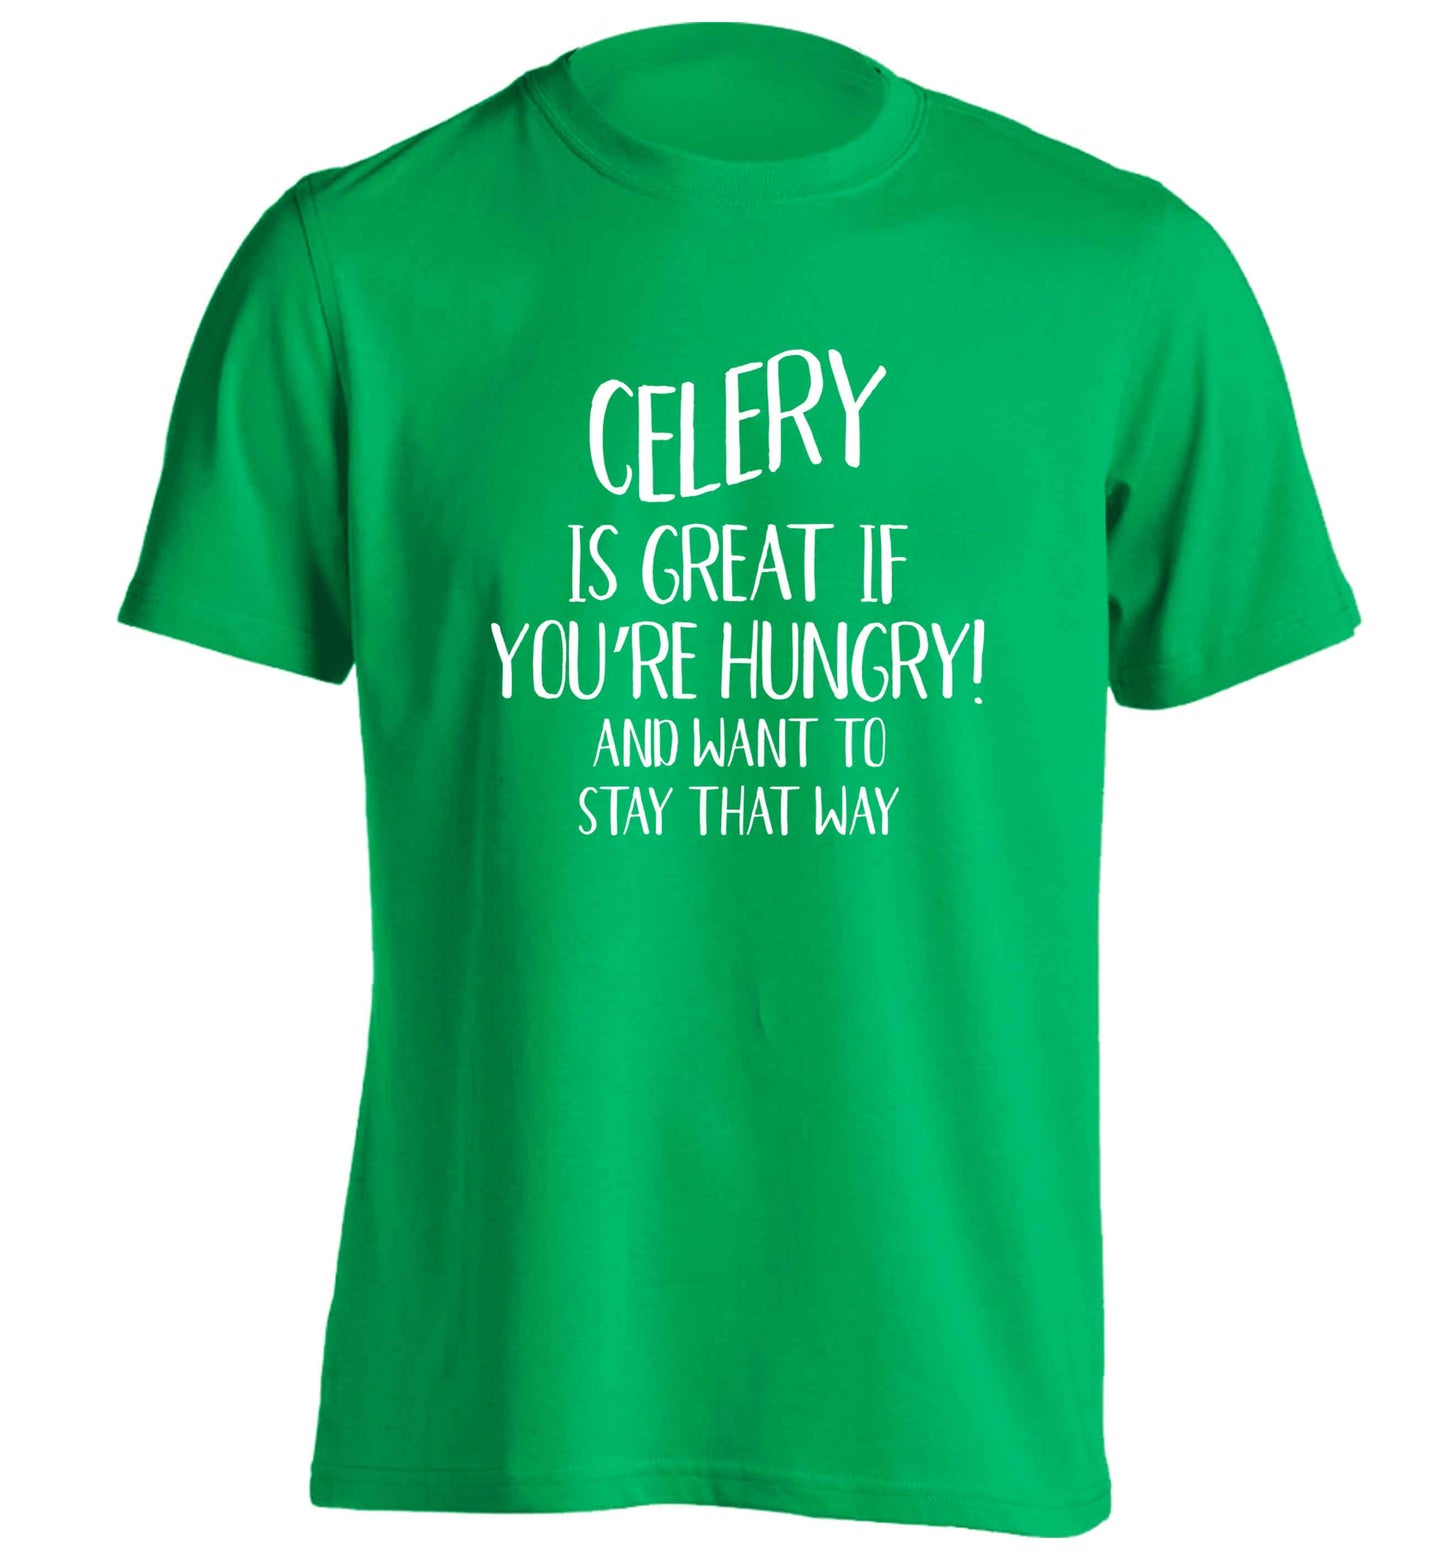 Cellery is great when you're hungry and want to stay that way adults unisex green Tshirt 2XL